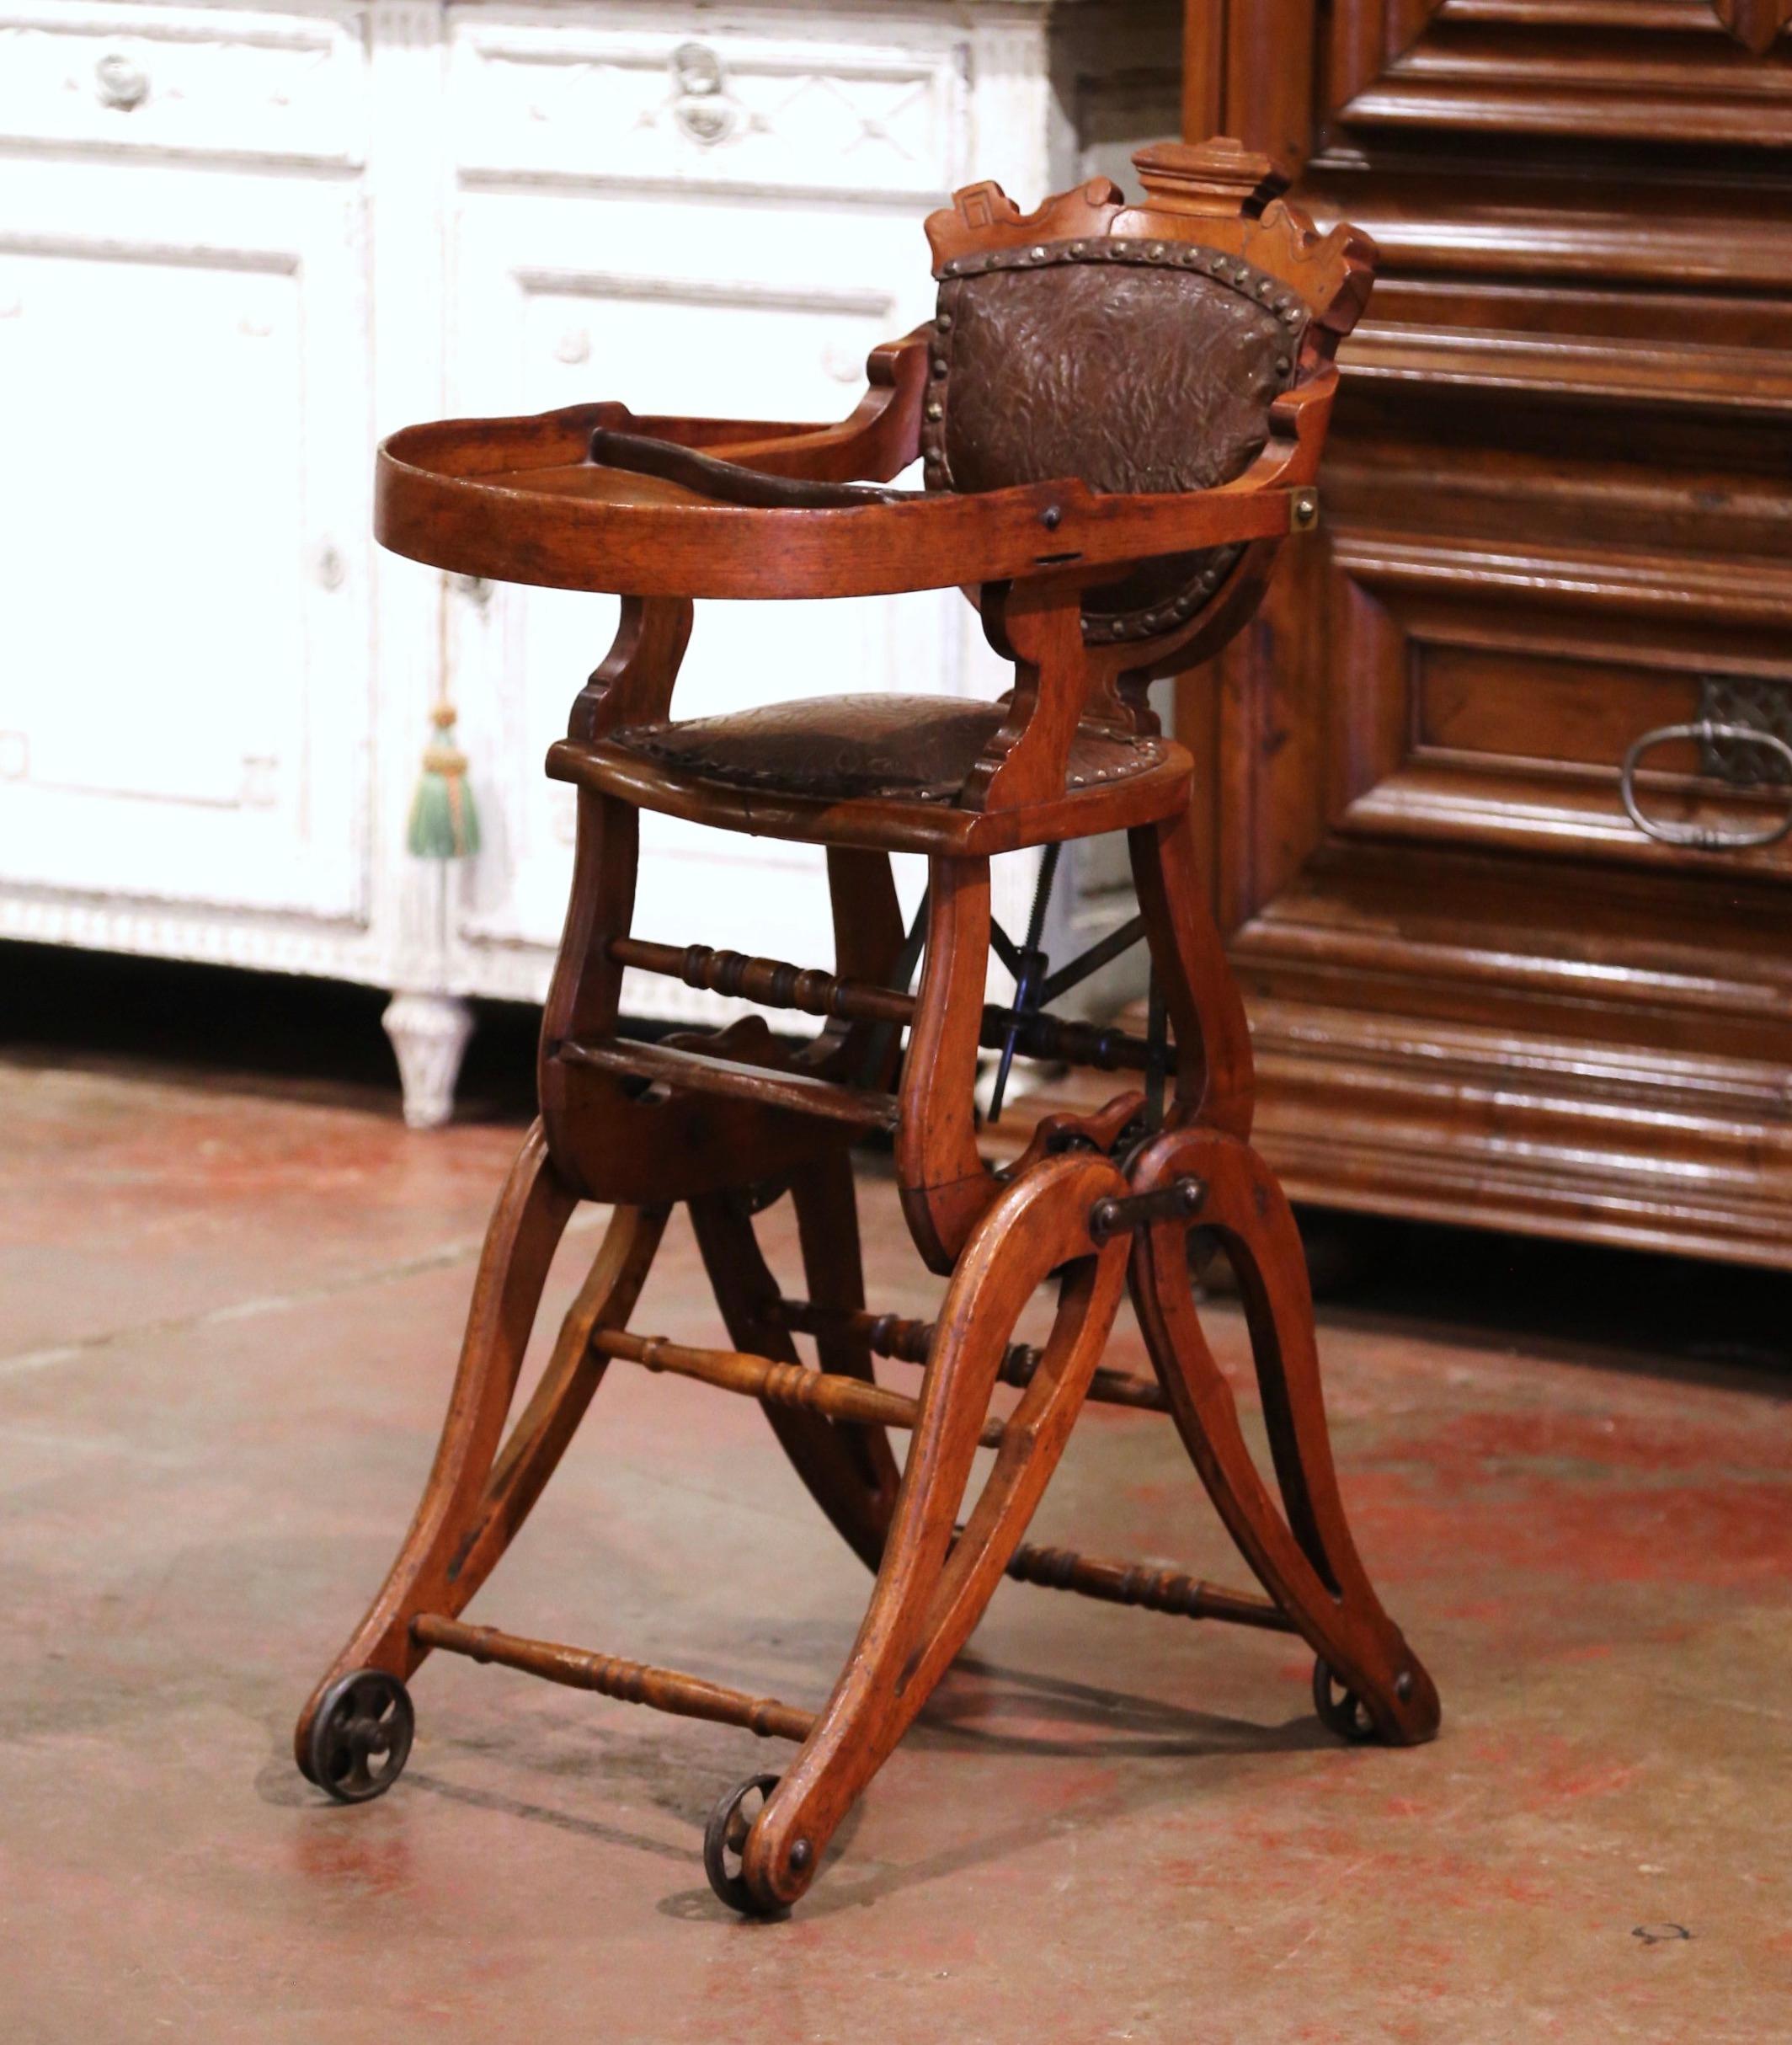 Feed your child in style or let him/her play in the antique and ingenious Victorian high chair! Crafted in England circa 1880 and made of walnut wood and upholstered with embossed brown leather, the charming baby chair has a double function; to feed